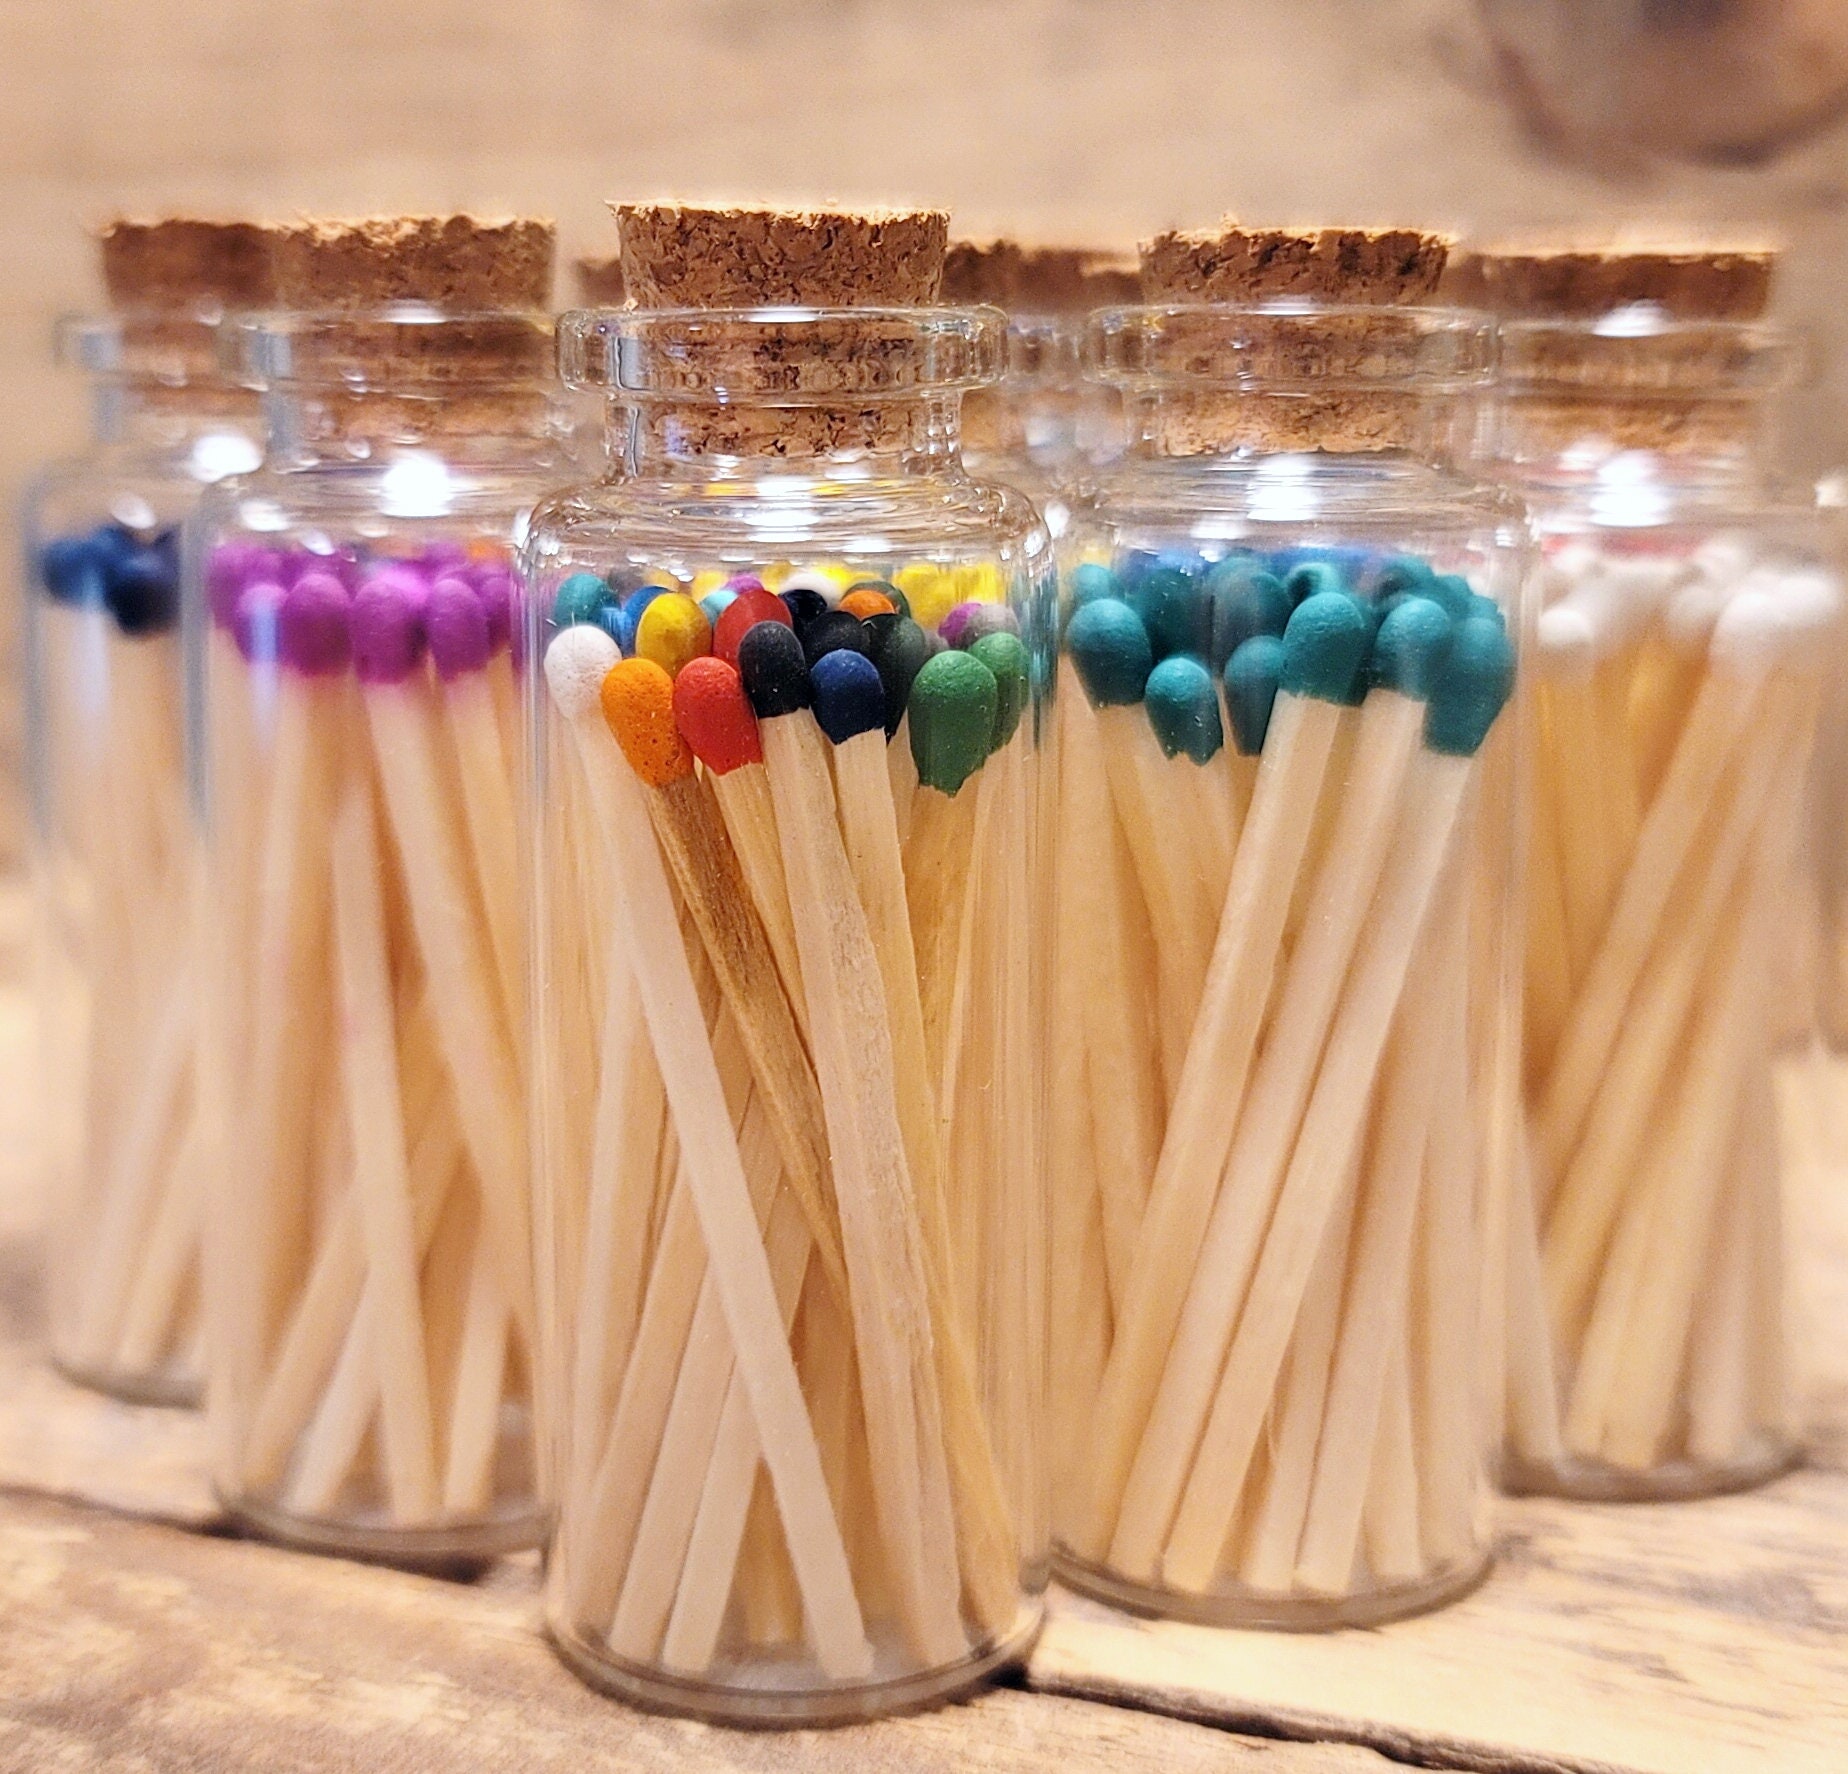 2 Rainbow Matches in a Jar + Striker Stickers Included | 100 Vibrantly  Colorful Decorative Safety Matches with a Cork Top Glass Holder | Gifts,  Home